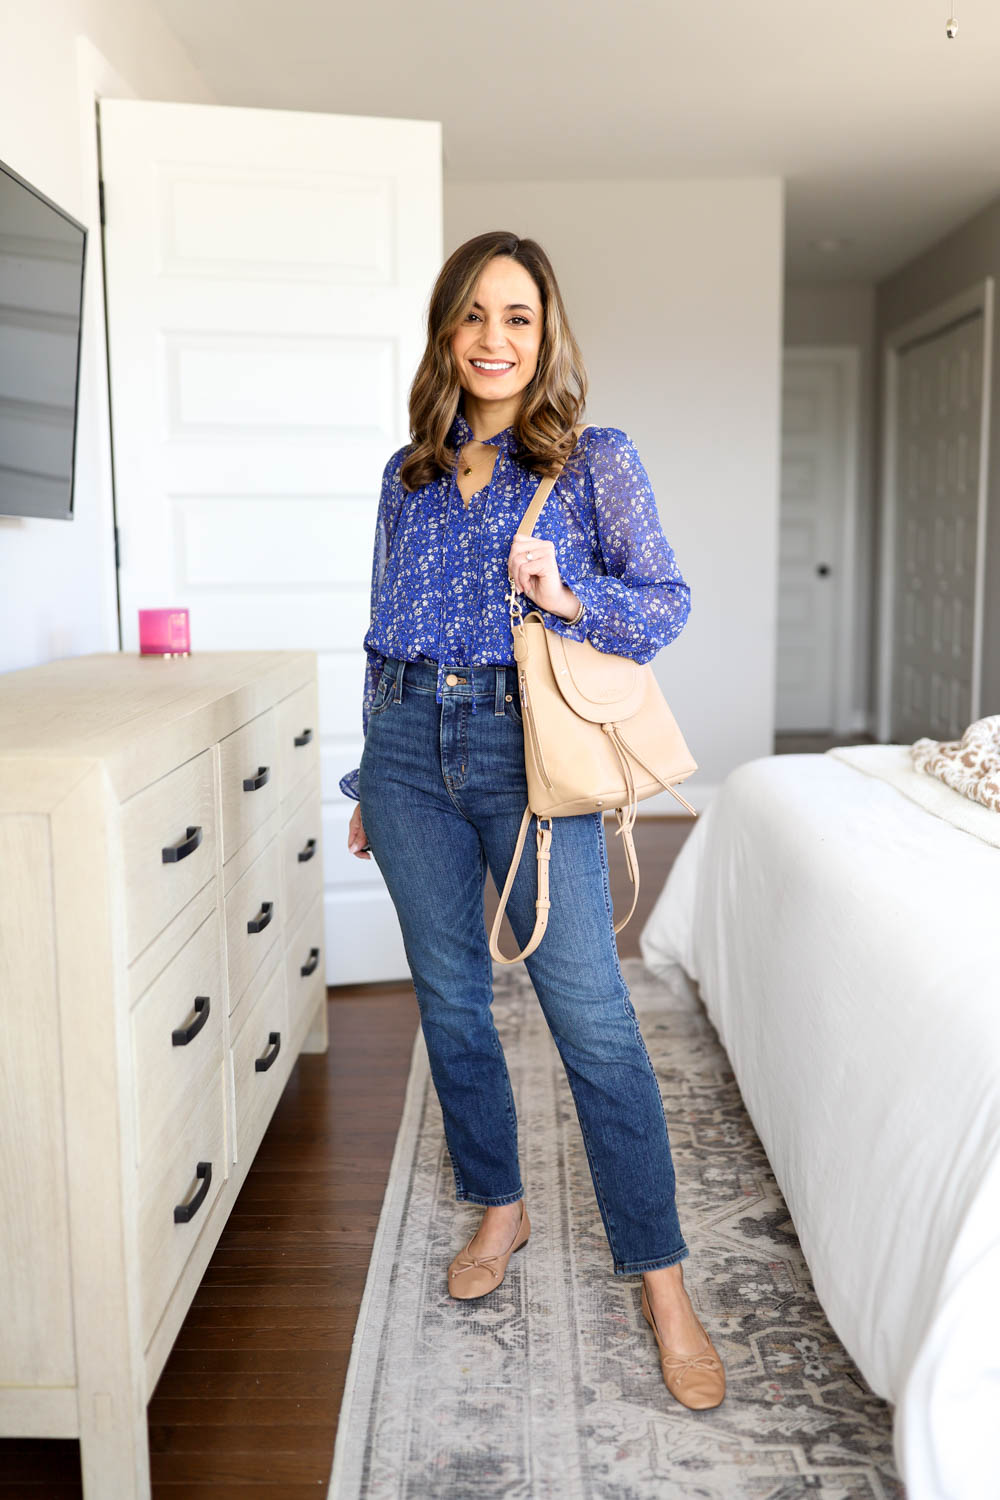 Express acceptabel Let Outfits for Work With Jeans - Pumps & Push Ups